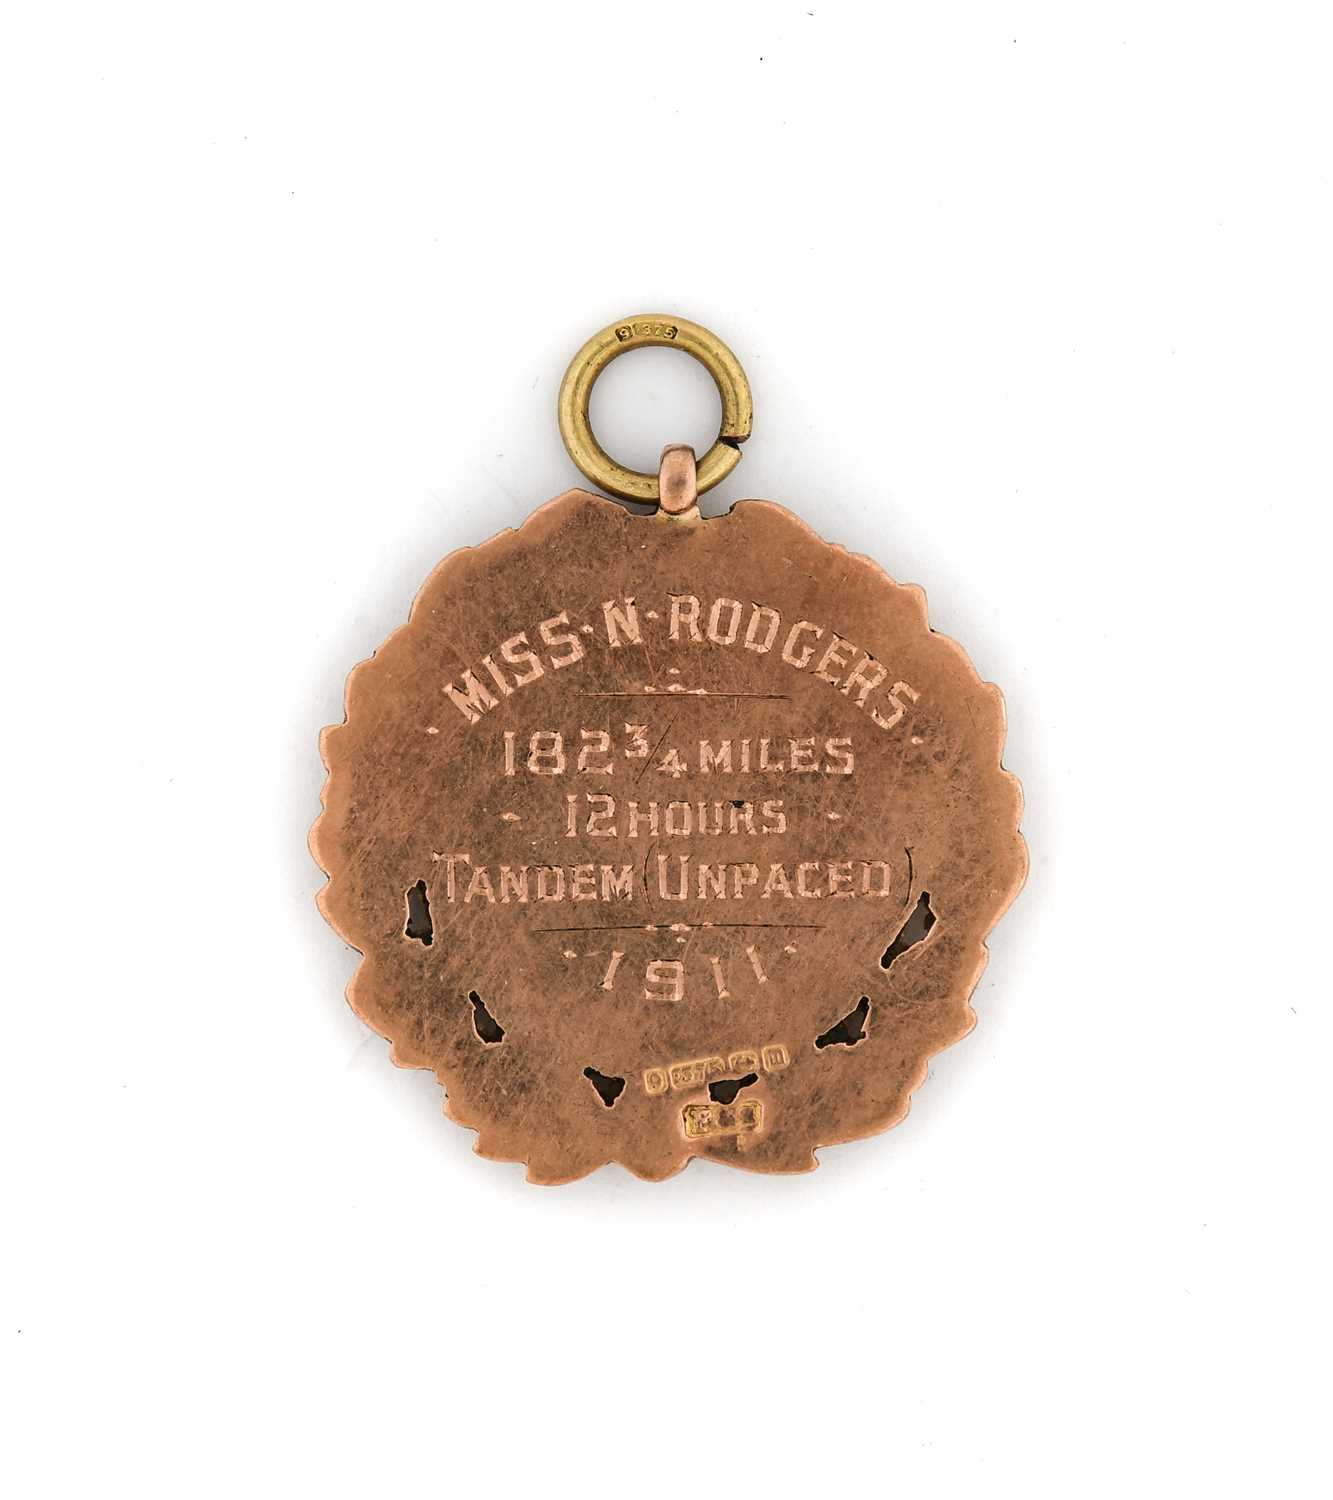 Collection Of Cycling Medals Relating To Nellie Rodgers And Family - Image 12 of 12